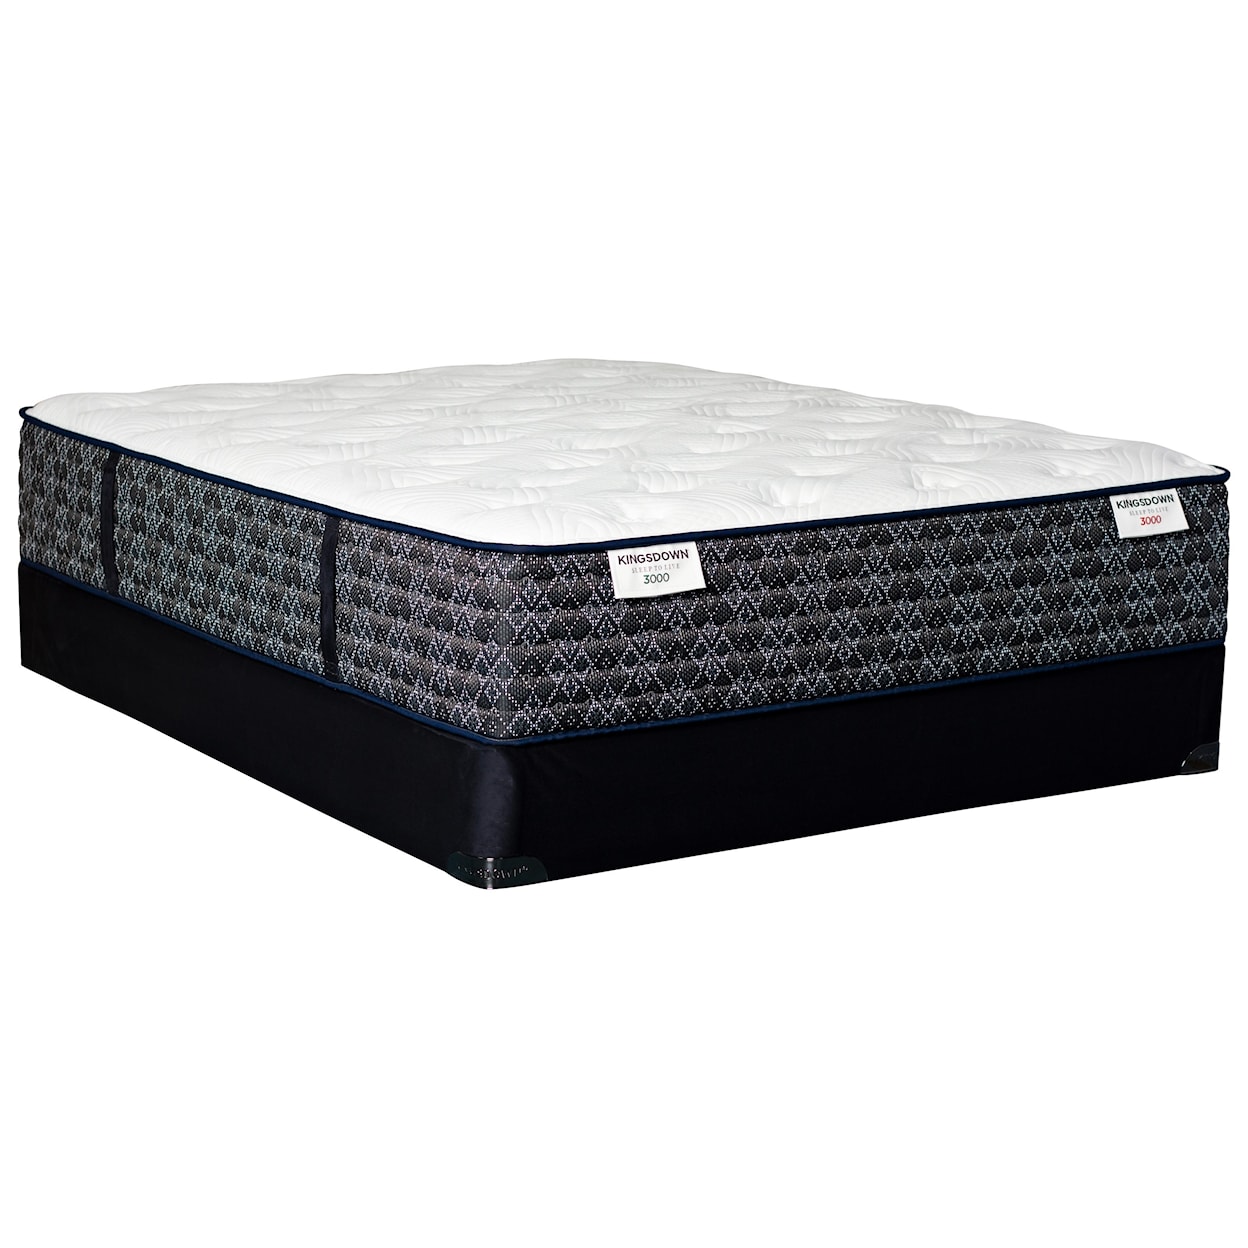 Kingsdown Sleep to Live 3000 Green Red Queen Pocketed Coil Mattress Set